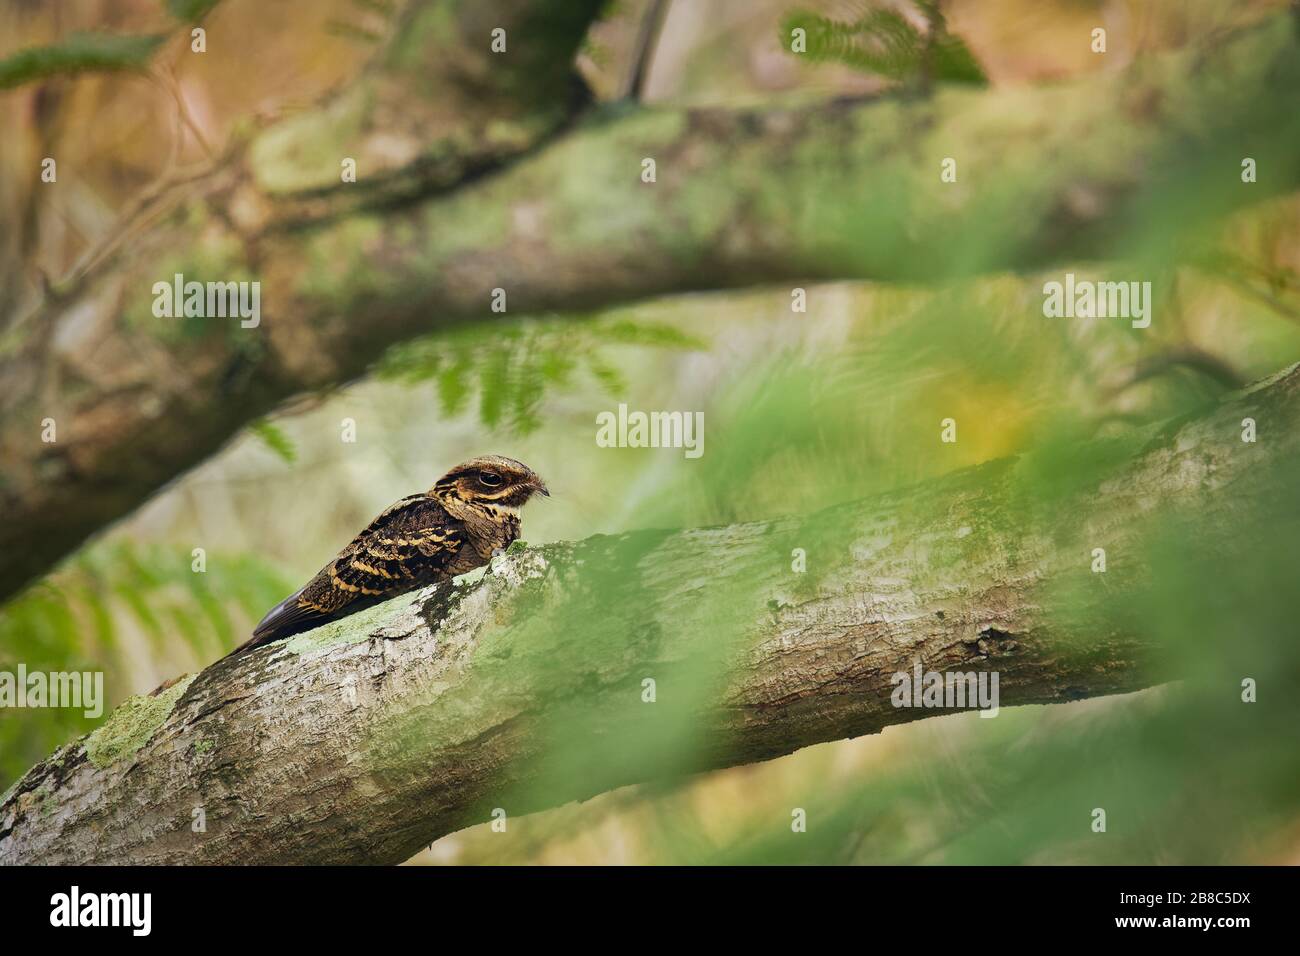 Large-tailed Nightjar - Caprimulgus macrurus nightjar in the family Caprimulgidae, found along the southern Himalayan foothills, eastern South Asia, S Stock Photo